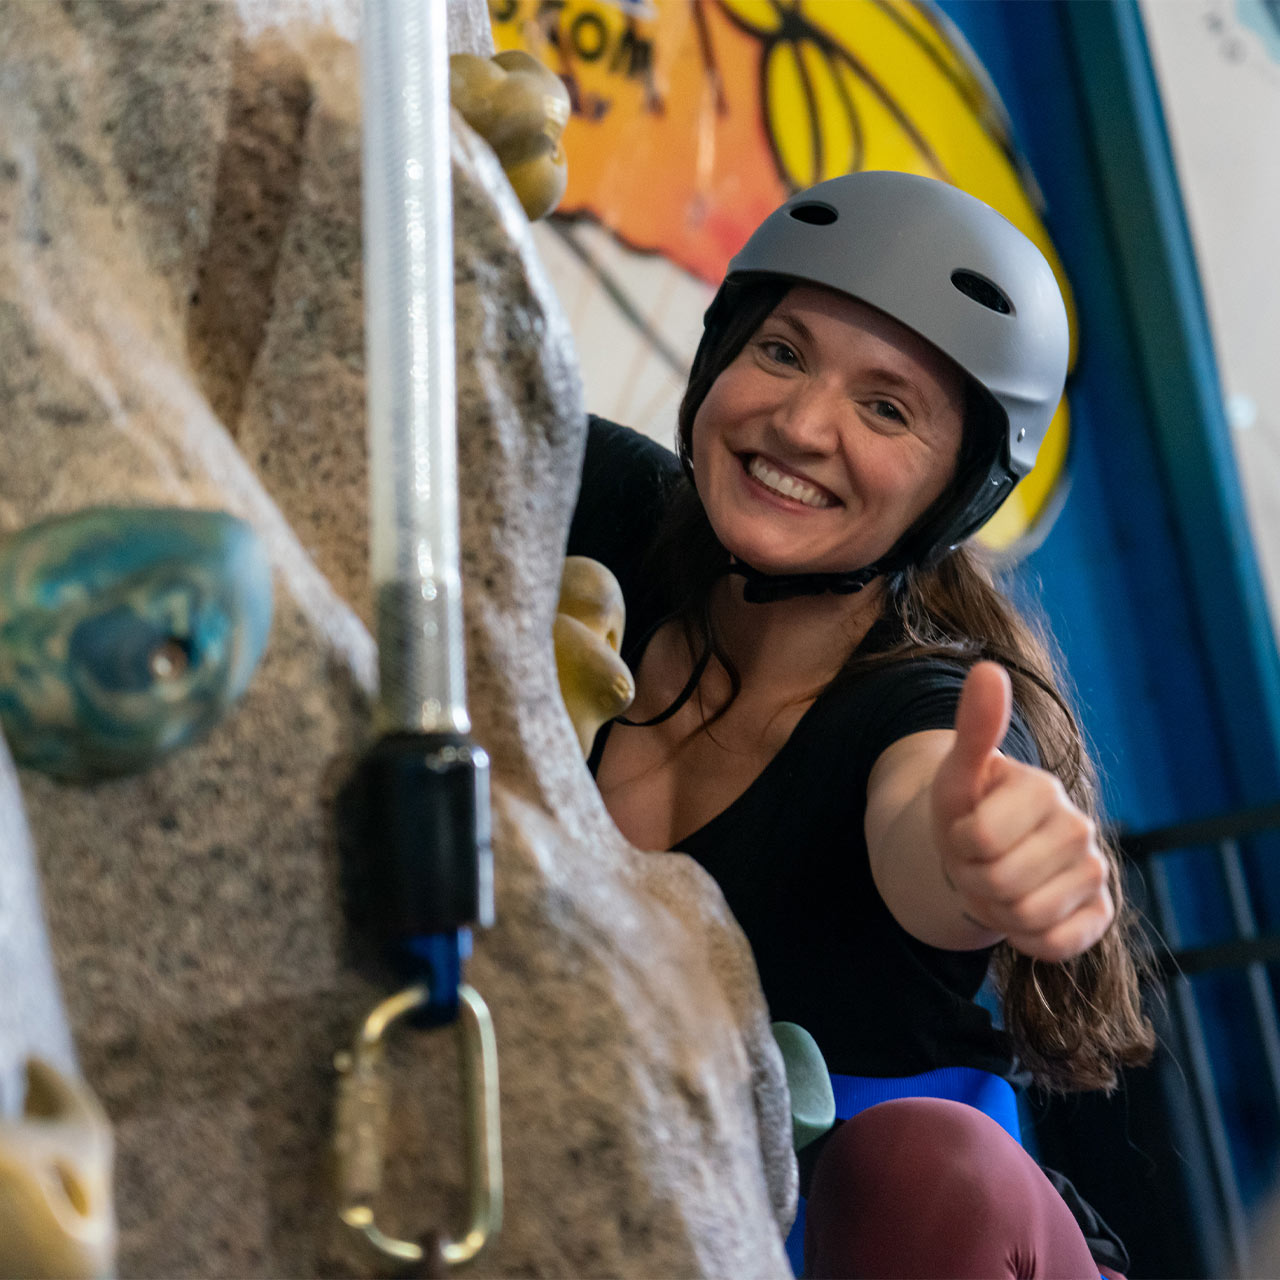 Smiling female with brunette hair gives a thumbs up while on the indoor climbing wall at Start Skydiving